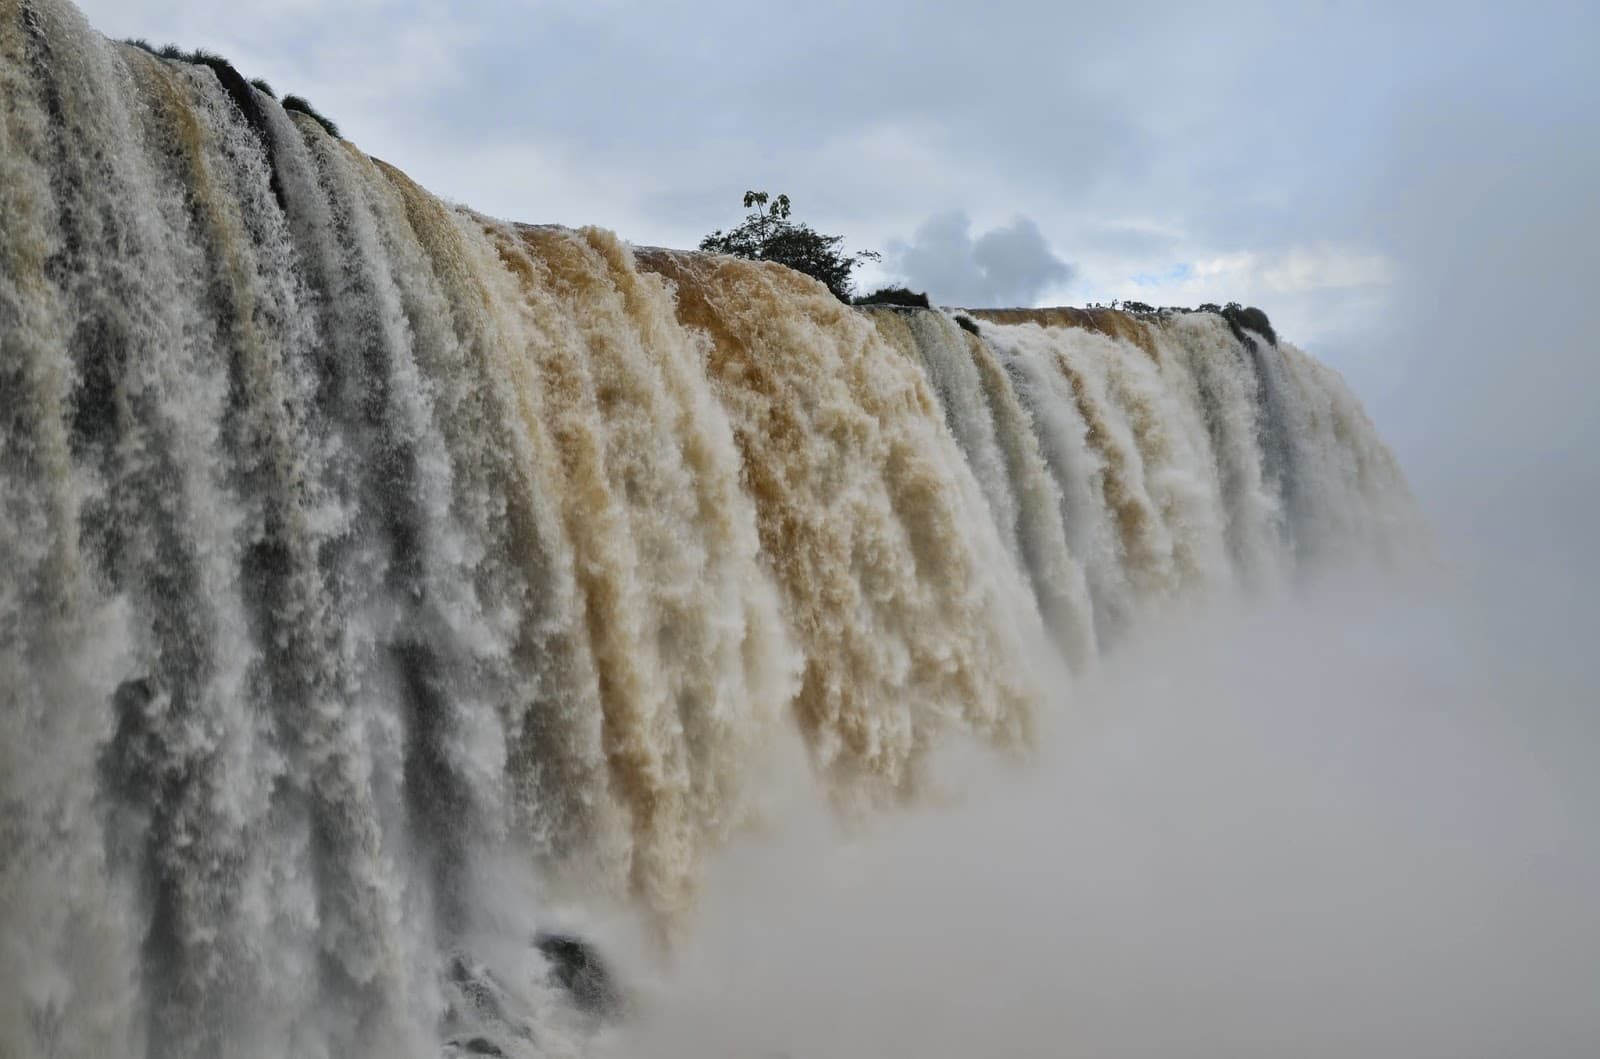 The falls from the lookout at Iguaçu National Park in Brazil